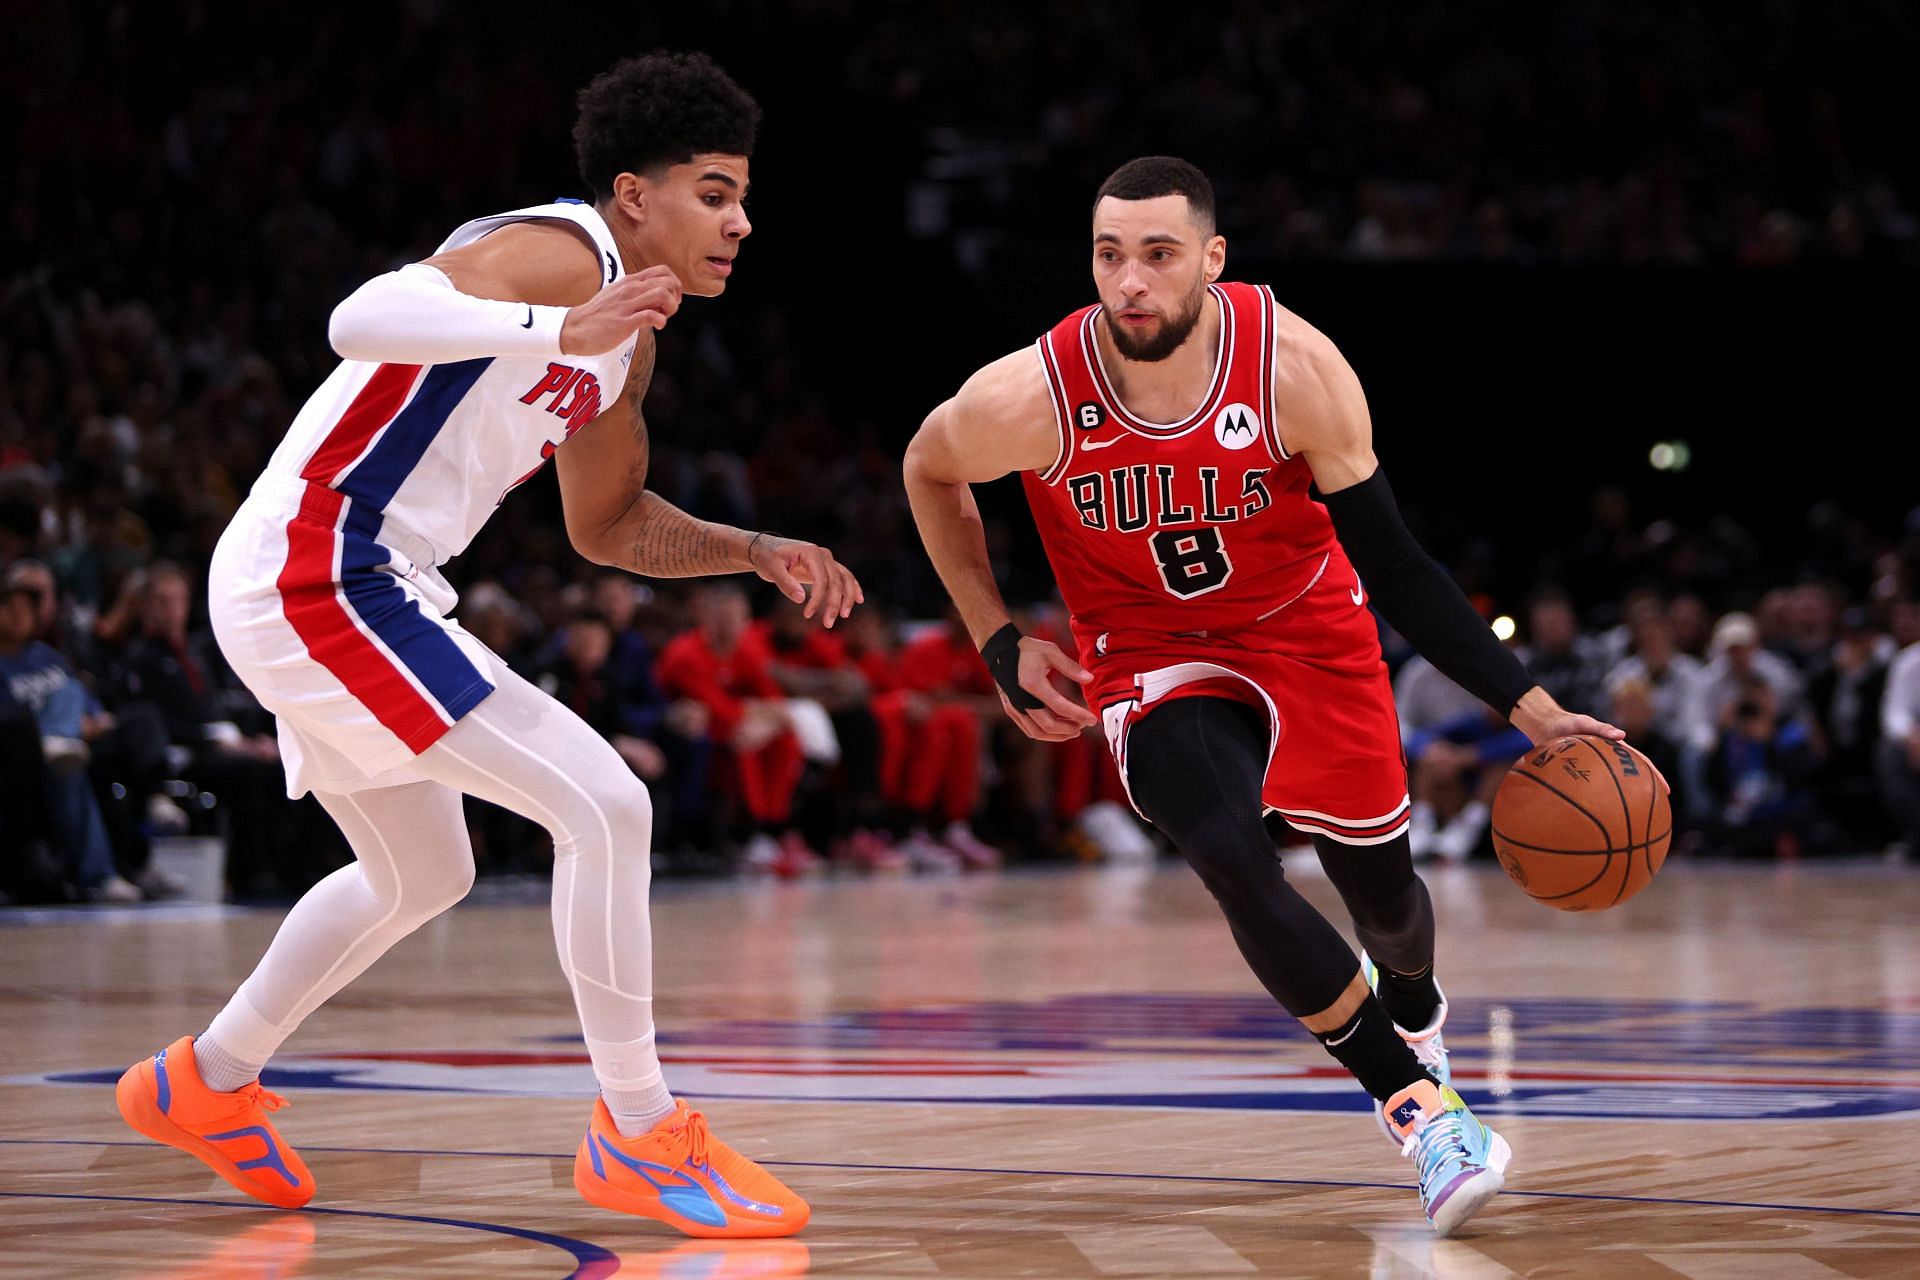 A package centered around Zach LaVine could make the LA Lakers legit title contenders.